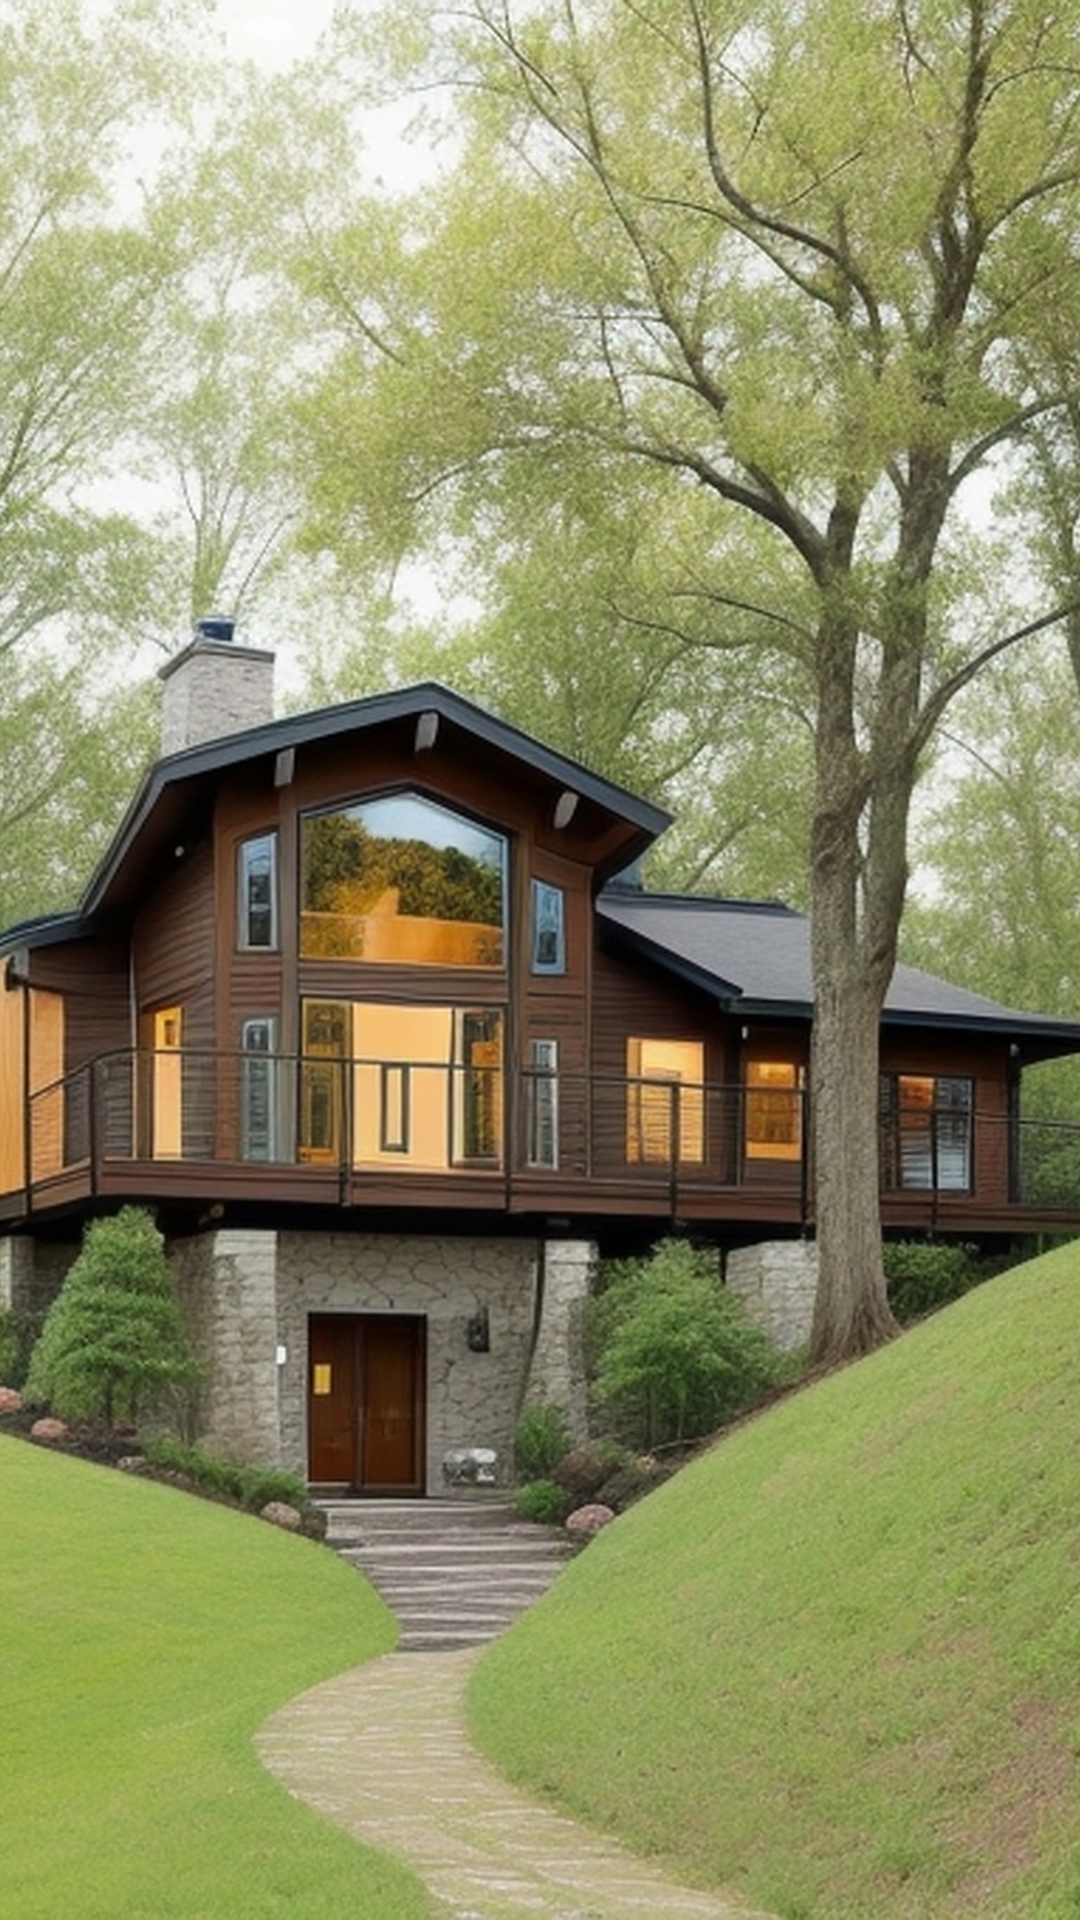 One-Story Home Architectural Styles: From Classic to Modern 